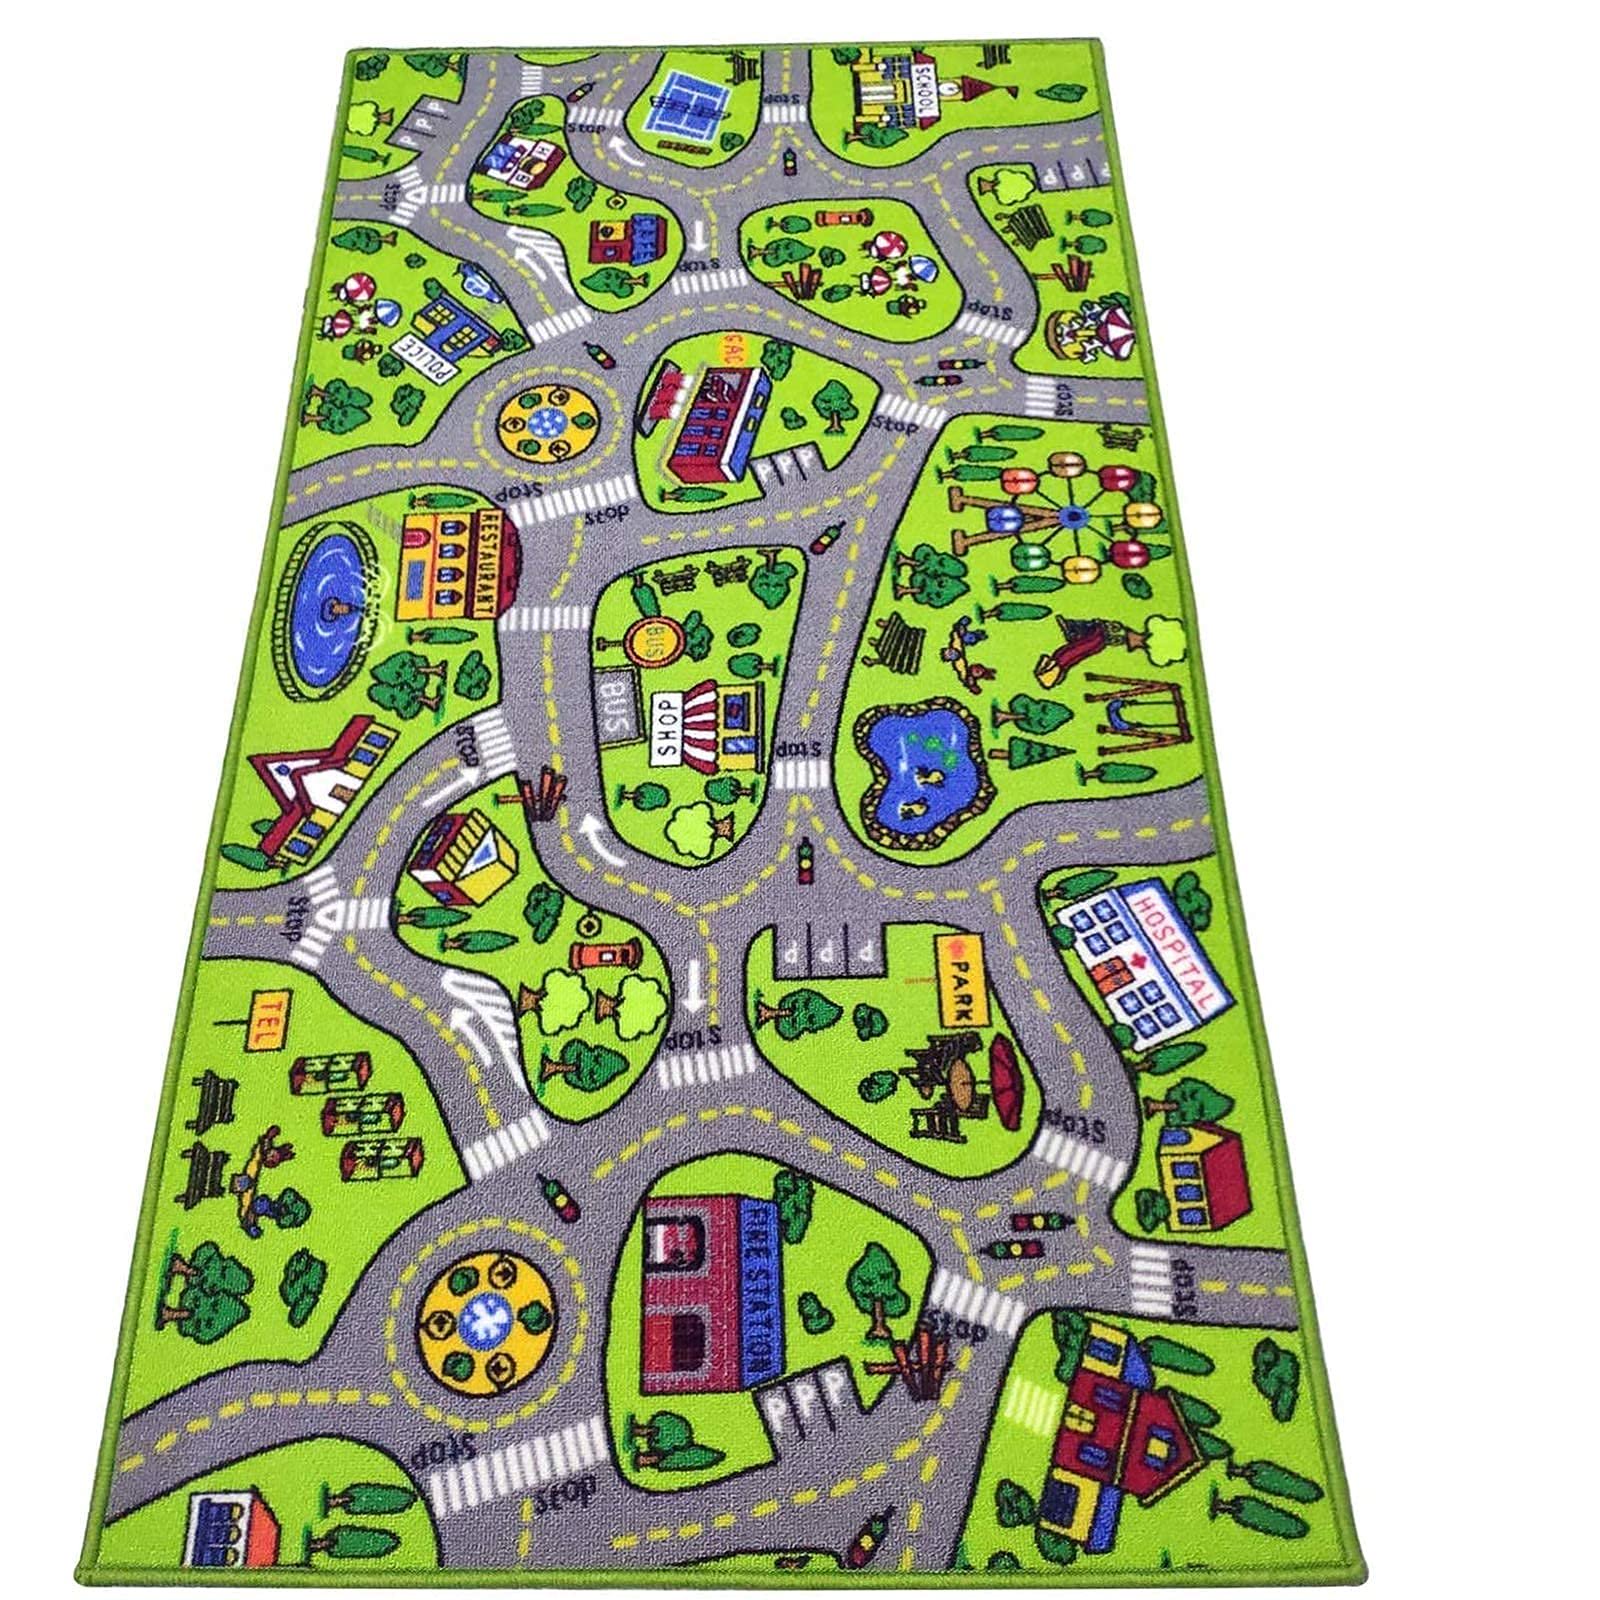 ToyVelt Kids Carpet Playmat Car Rug, City Life Educational Road Traffic Carpet Multi Color Play Mat - Large 60 x 32 Best Kids Rugs for Playroom & Kid Bedroom, for Ages 3-12 Years Old - image 1 of 5